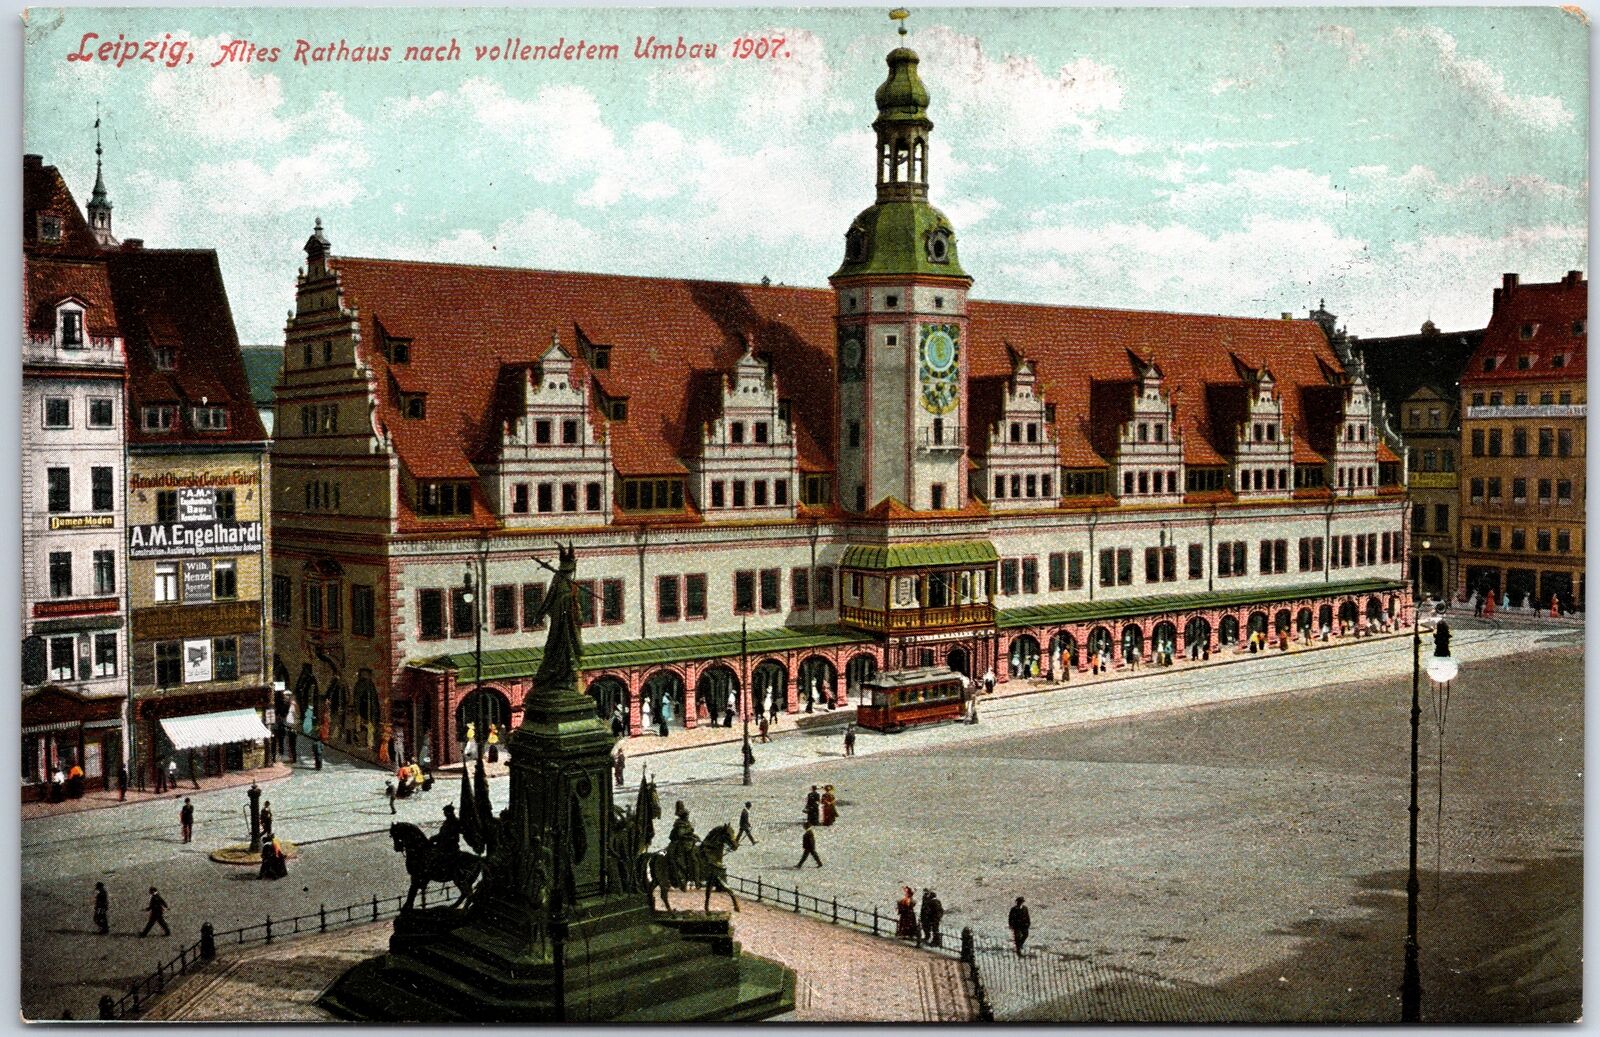 VINTAGE POSTCARD THE COMPLETED CONVERSION OF THE LEIPZIG CITY HALL GERMANY 1907